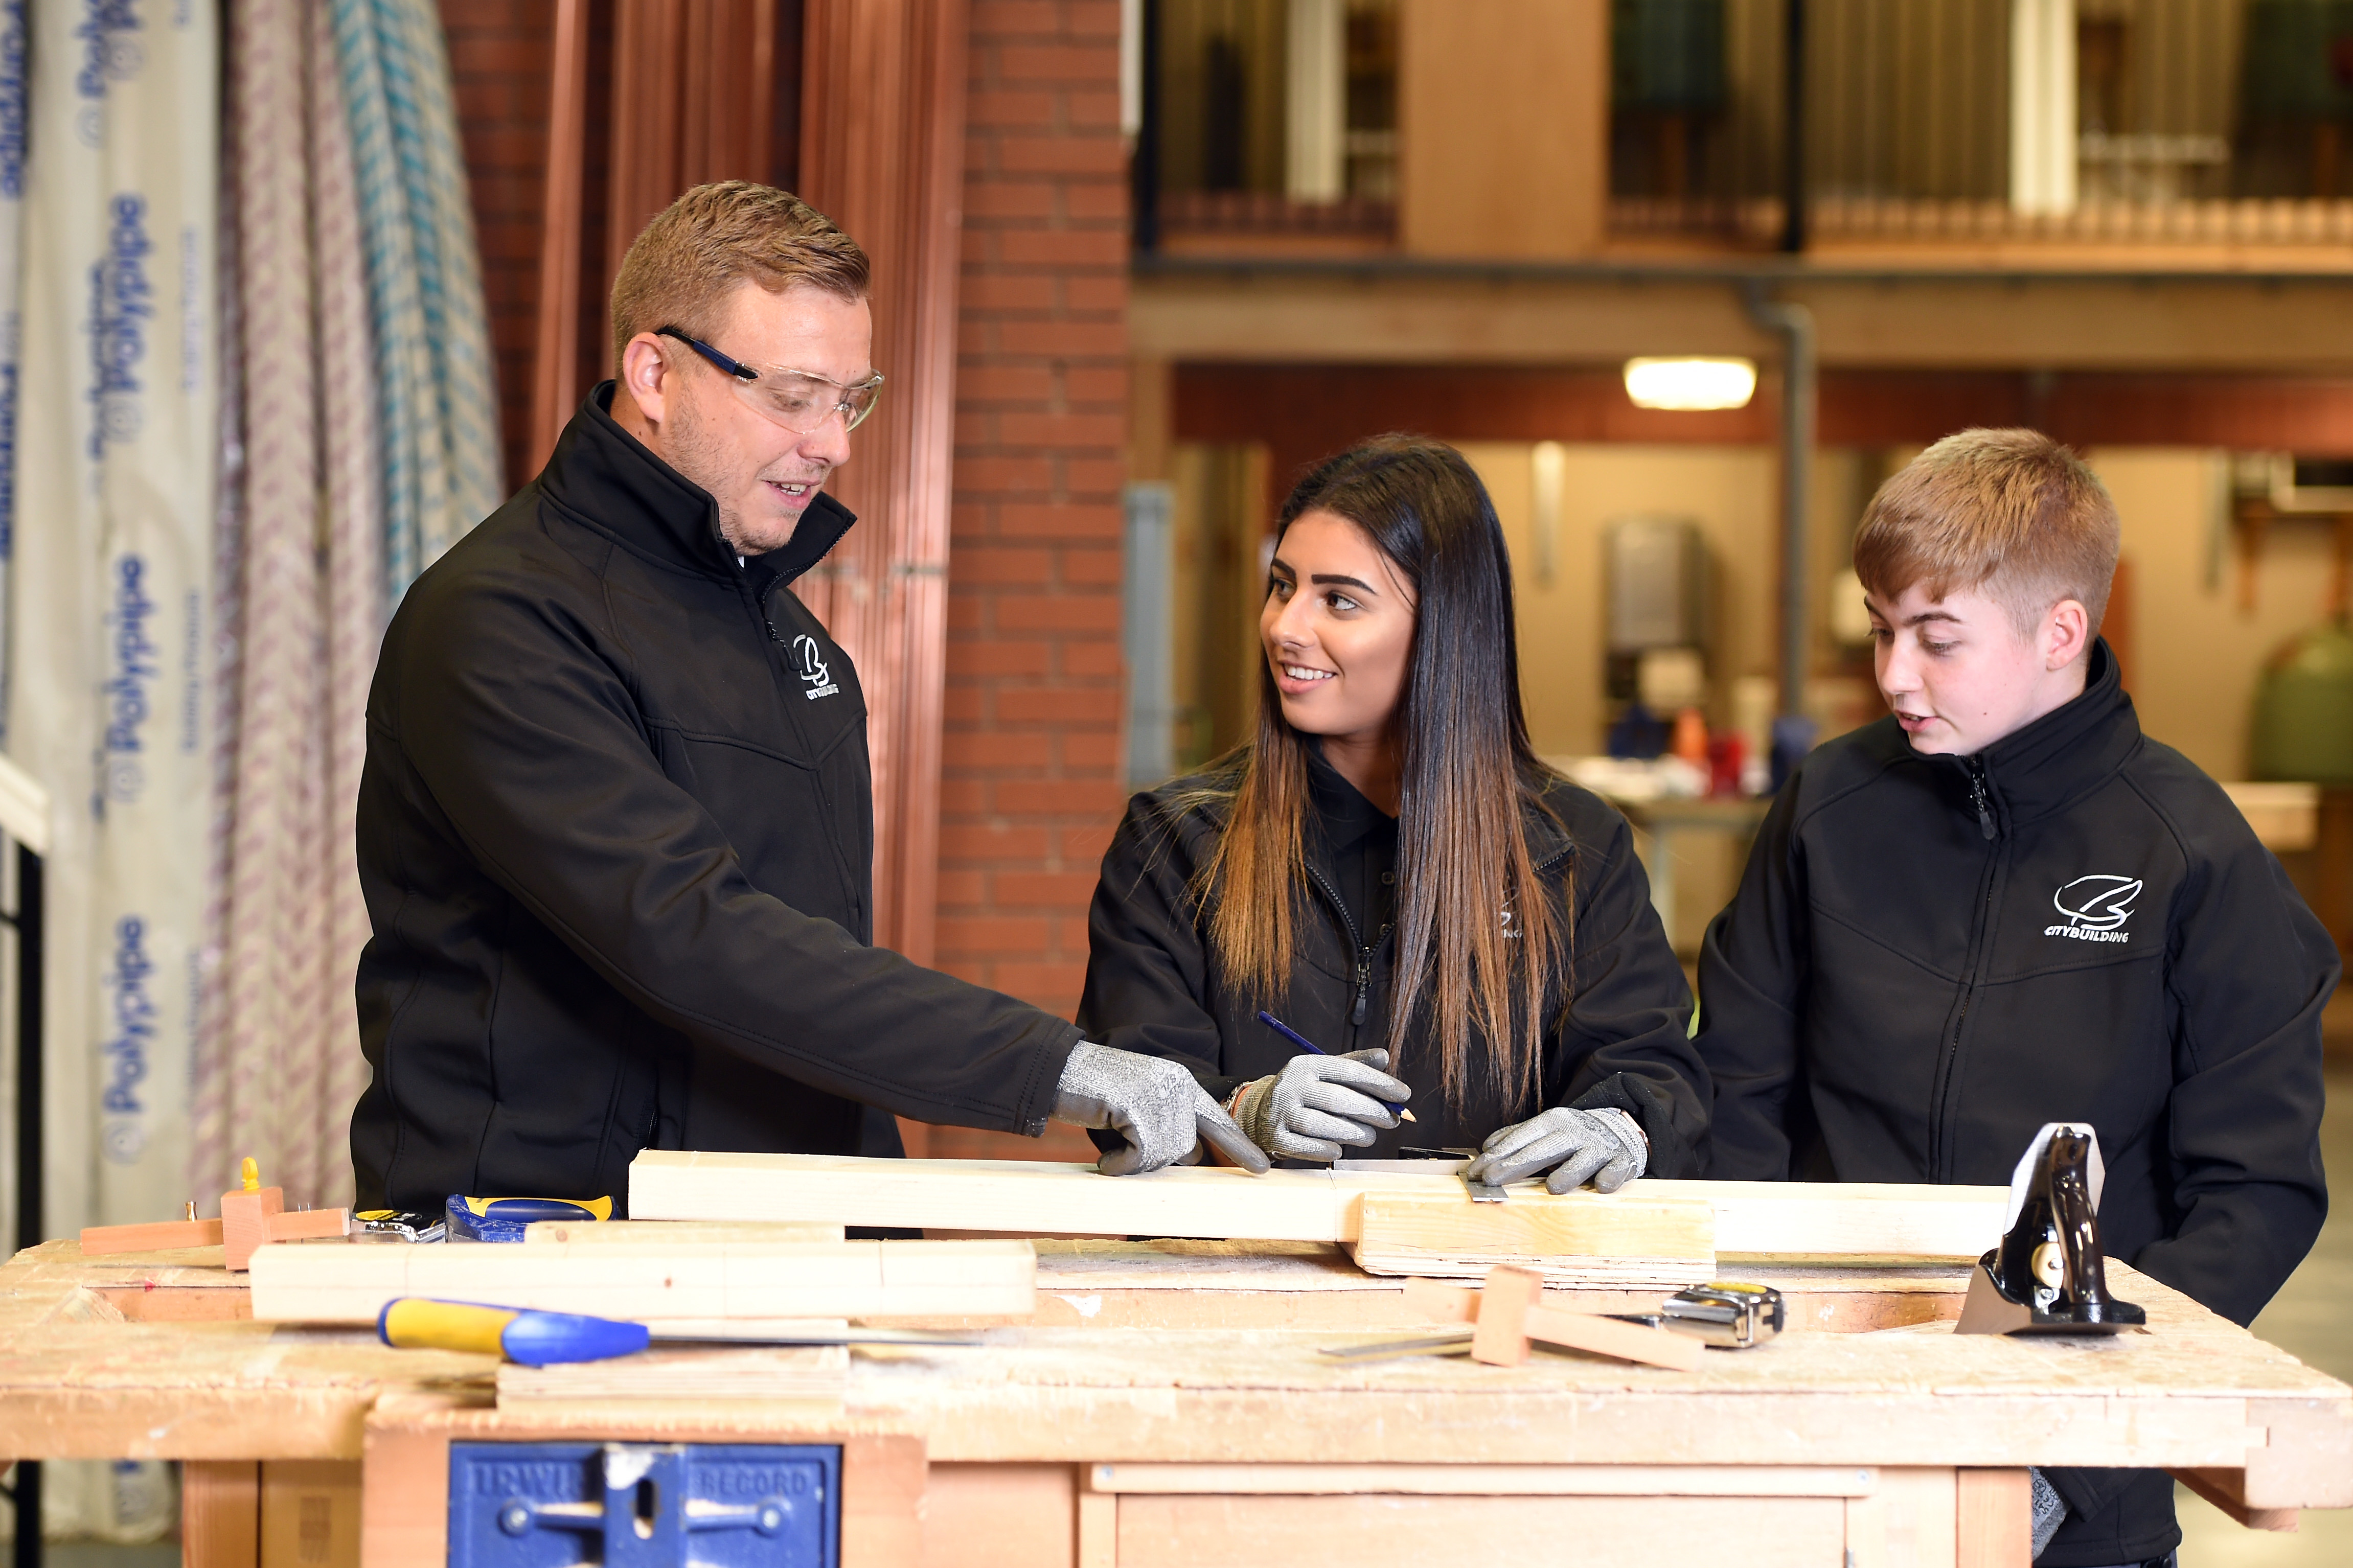 City Building welcomes 60 new apprentices